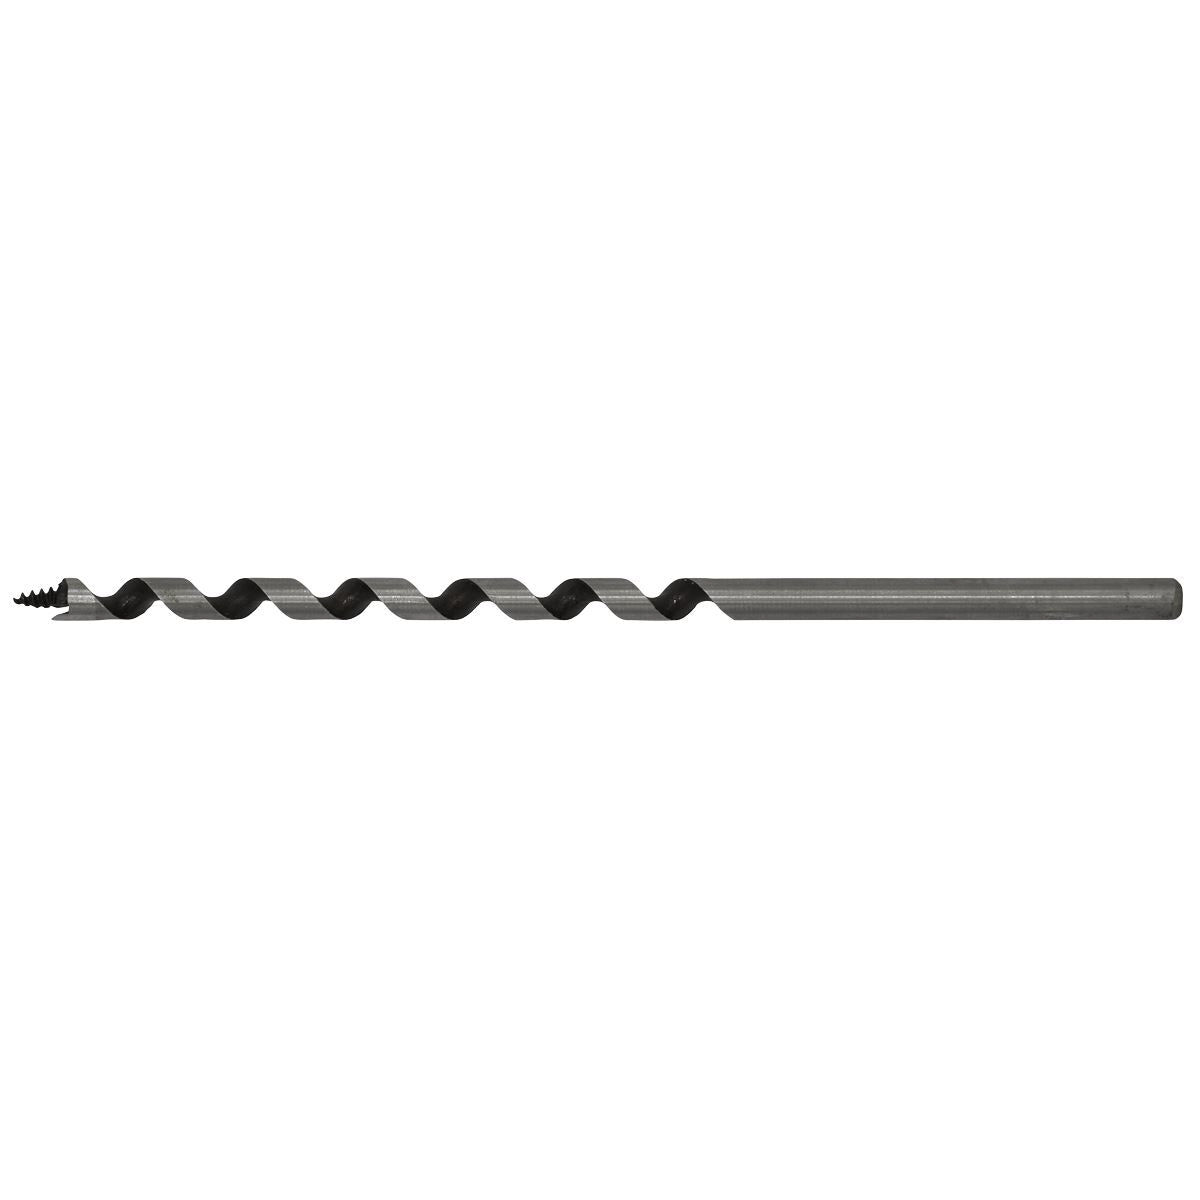 Worksafe by Sealey Auger Wood Drill Bit 6mm x 155mm